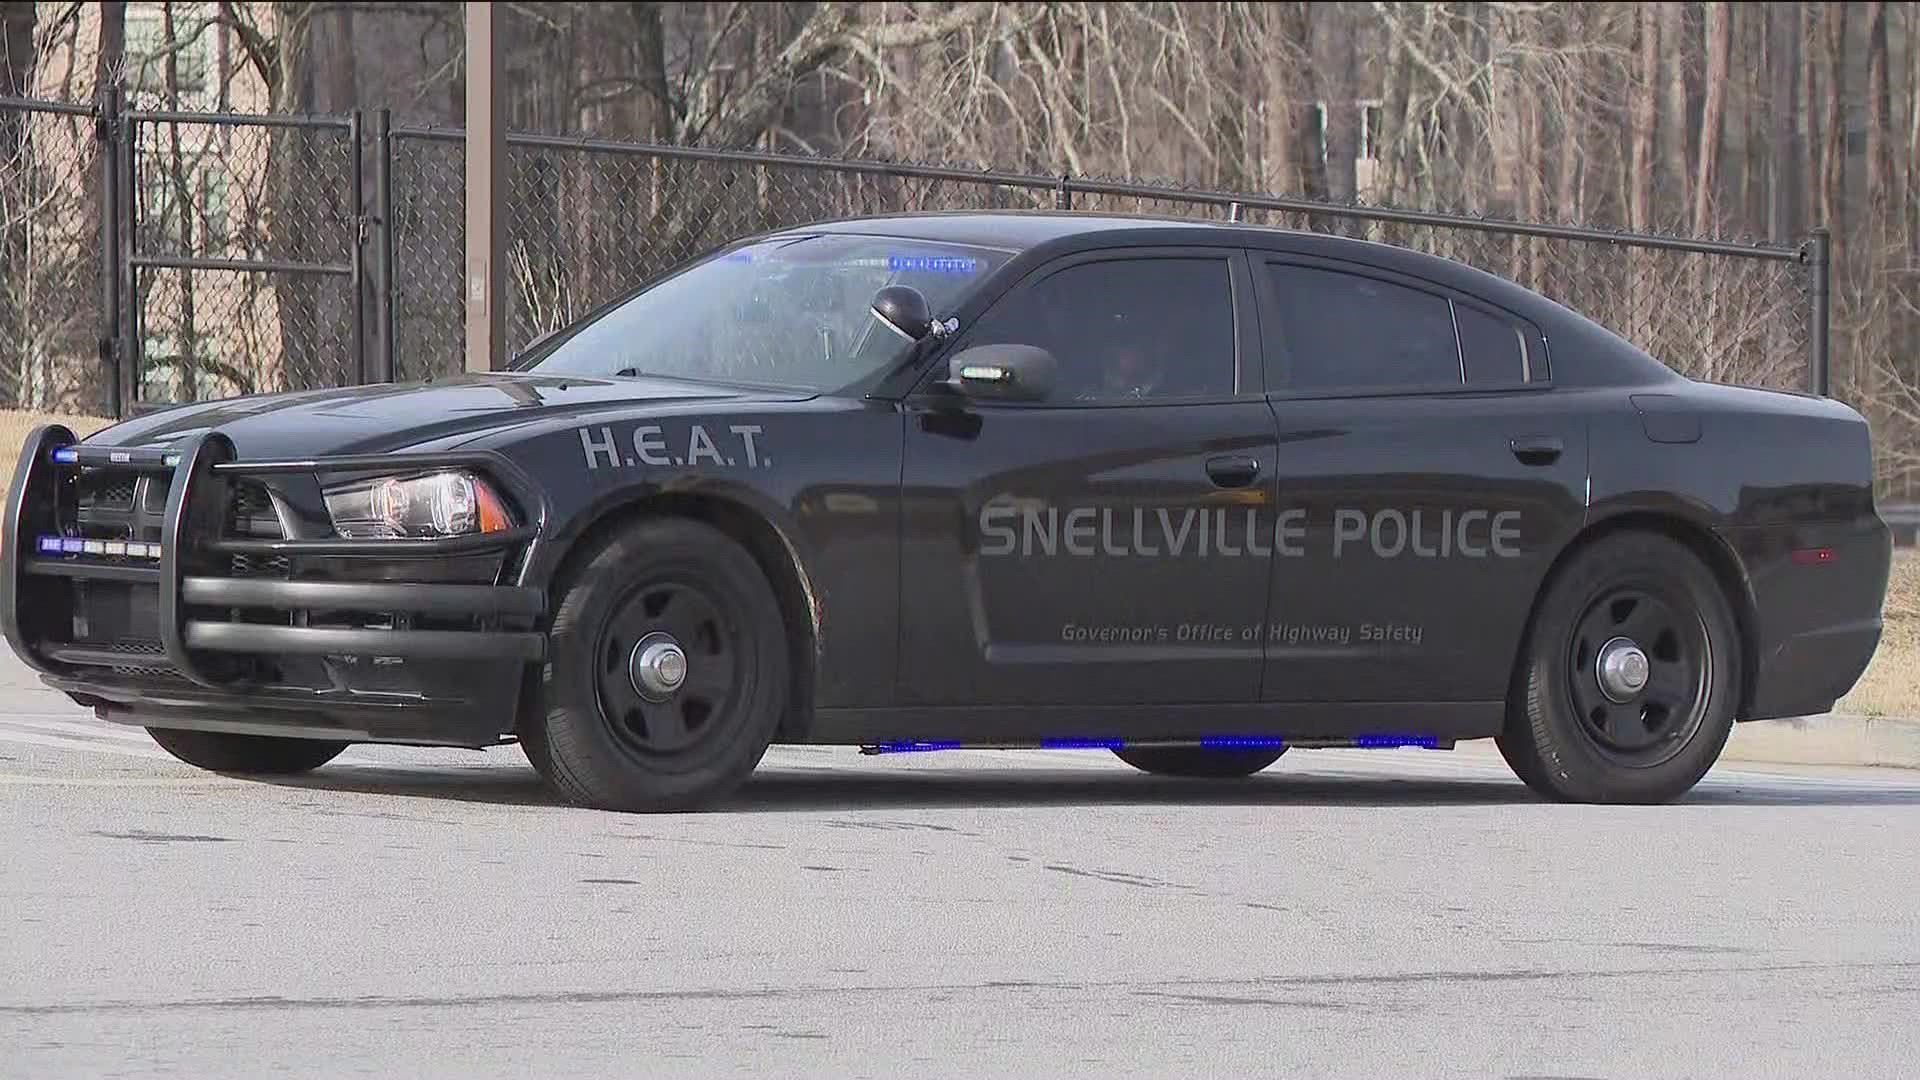 Snellville Police said the officer "sustained a minor injury during the event" and was treated at a hospital.